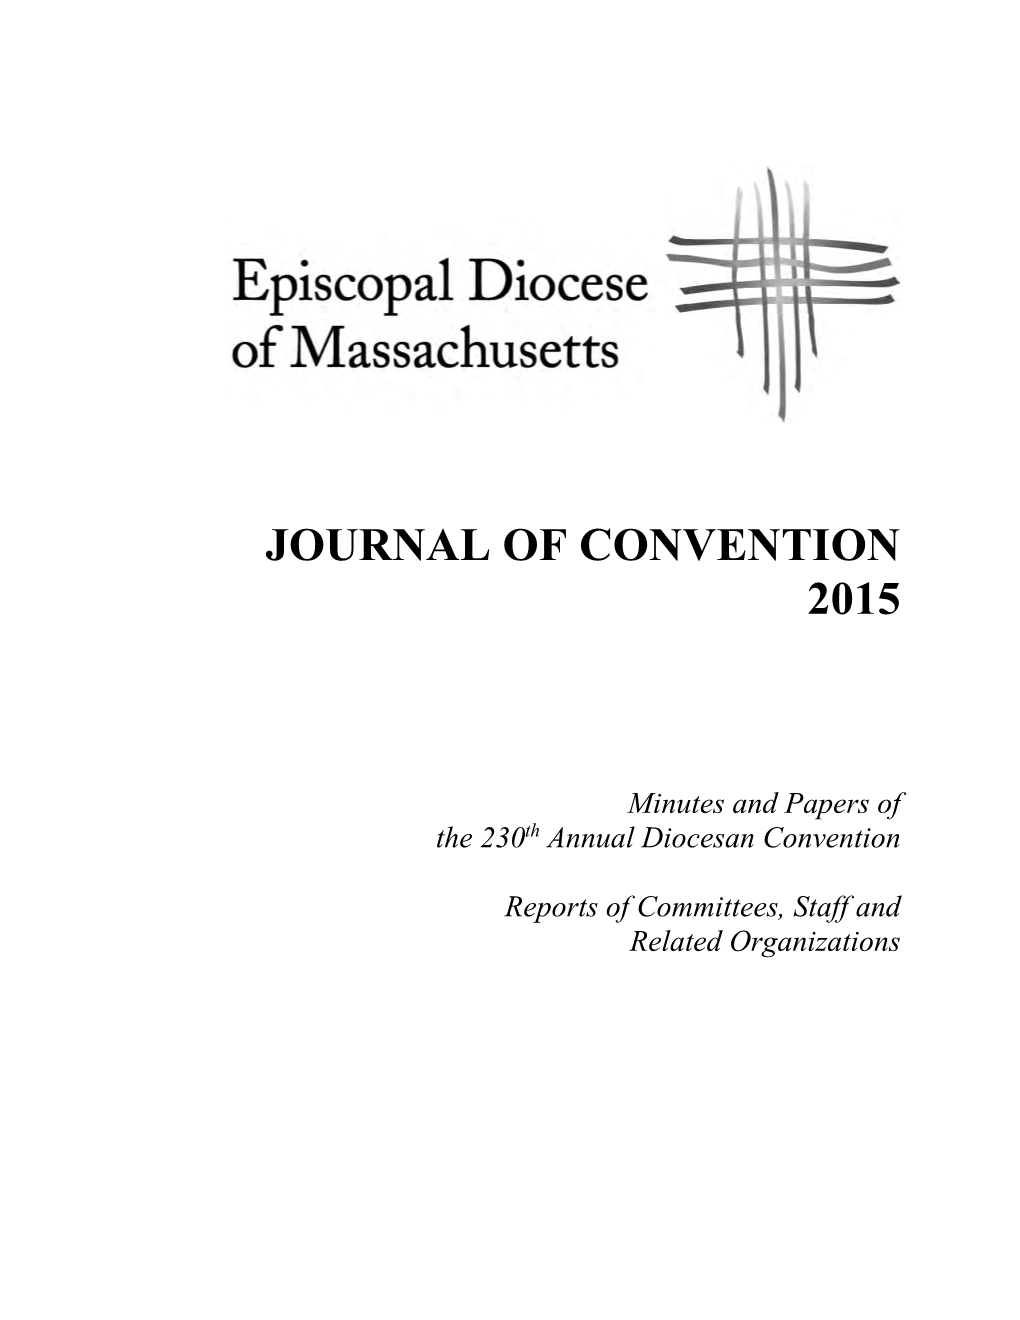 Journal of Convention 2015.Pdf